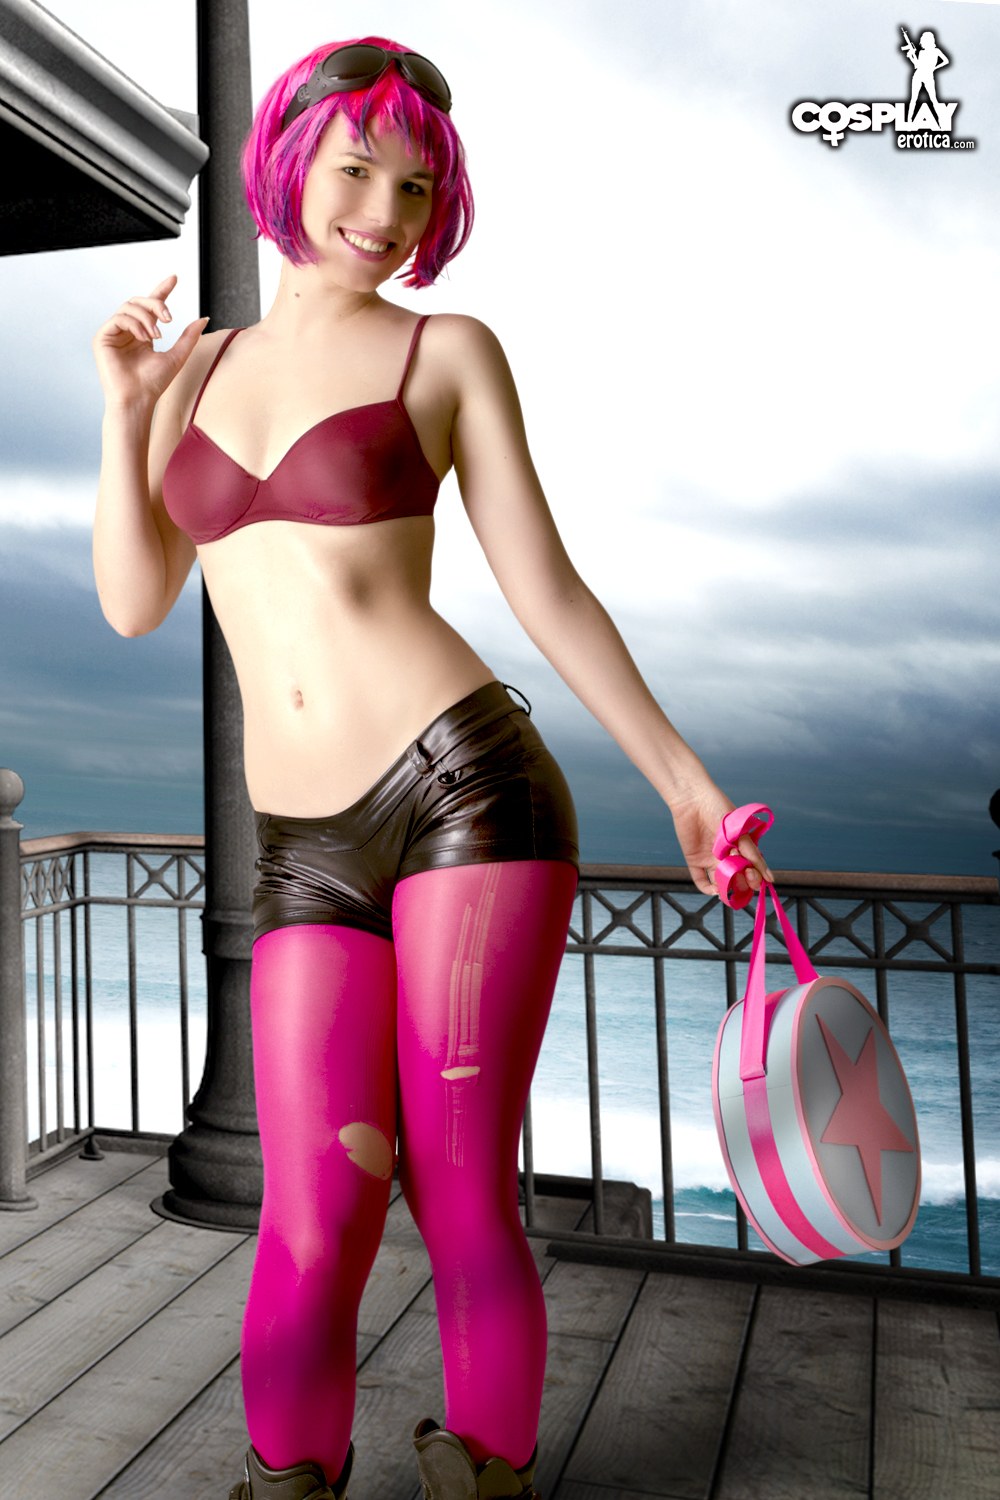 Pretty American Cosplay Girl Ramona Flowers In Leather Shorts And Pink Pant...